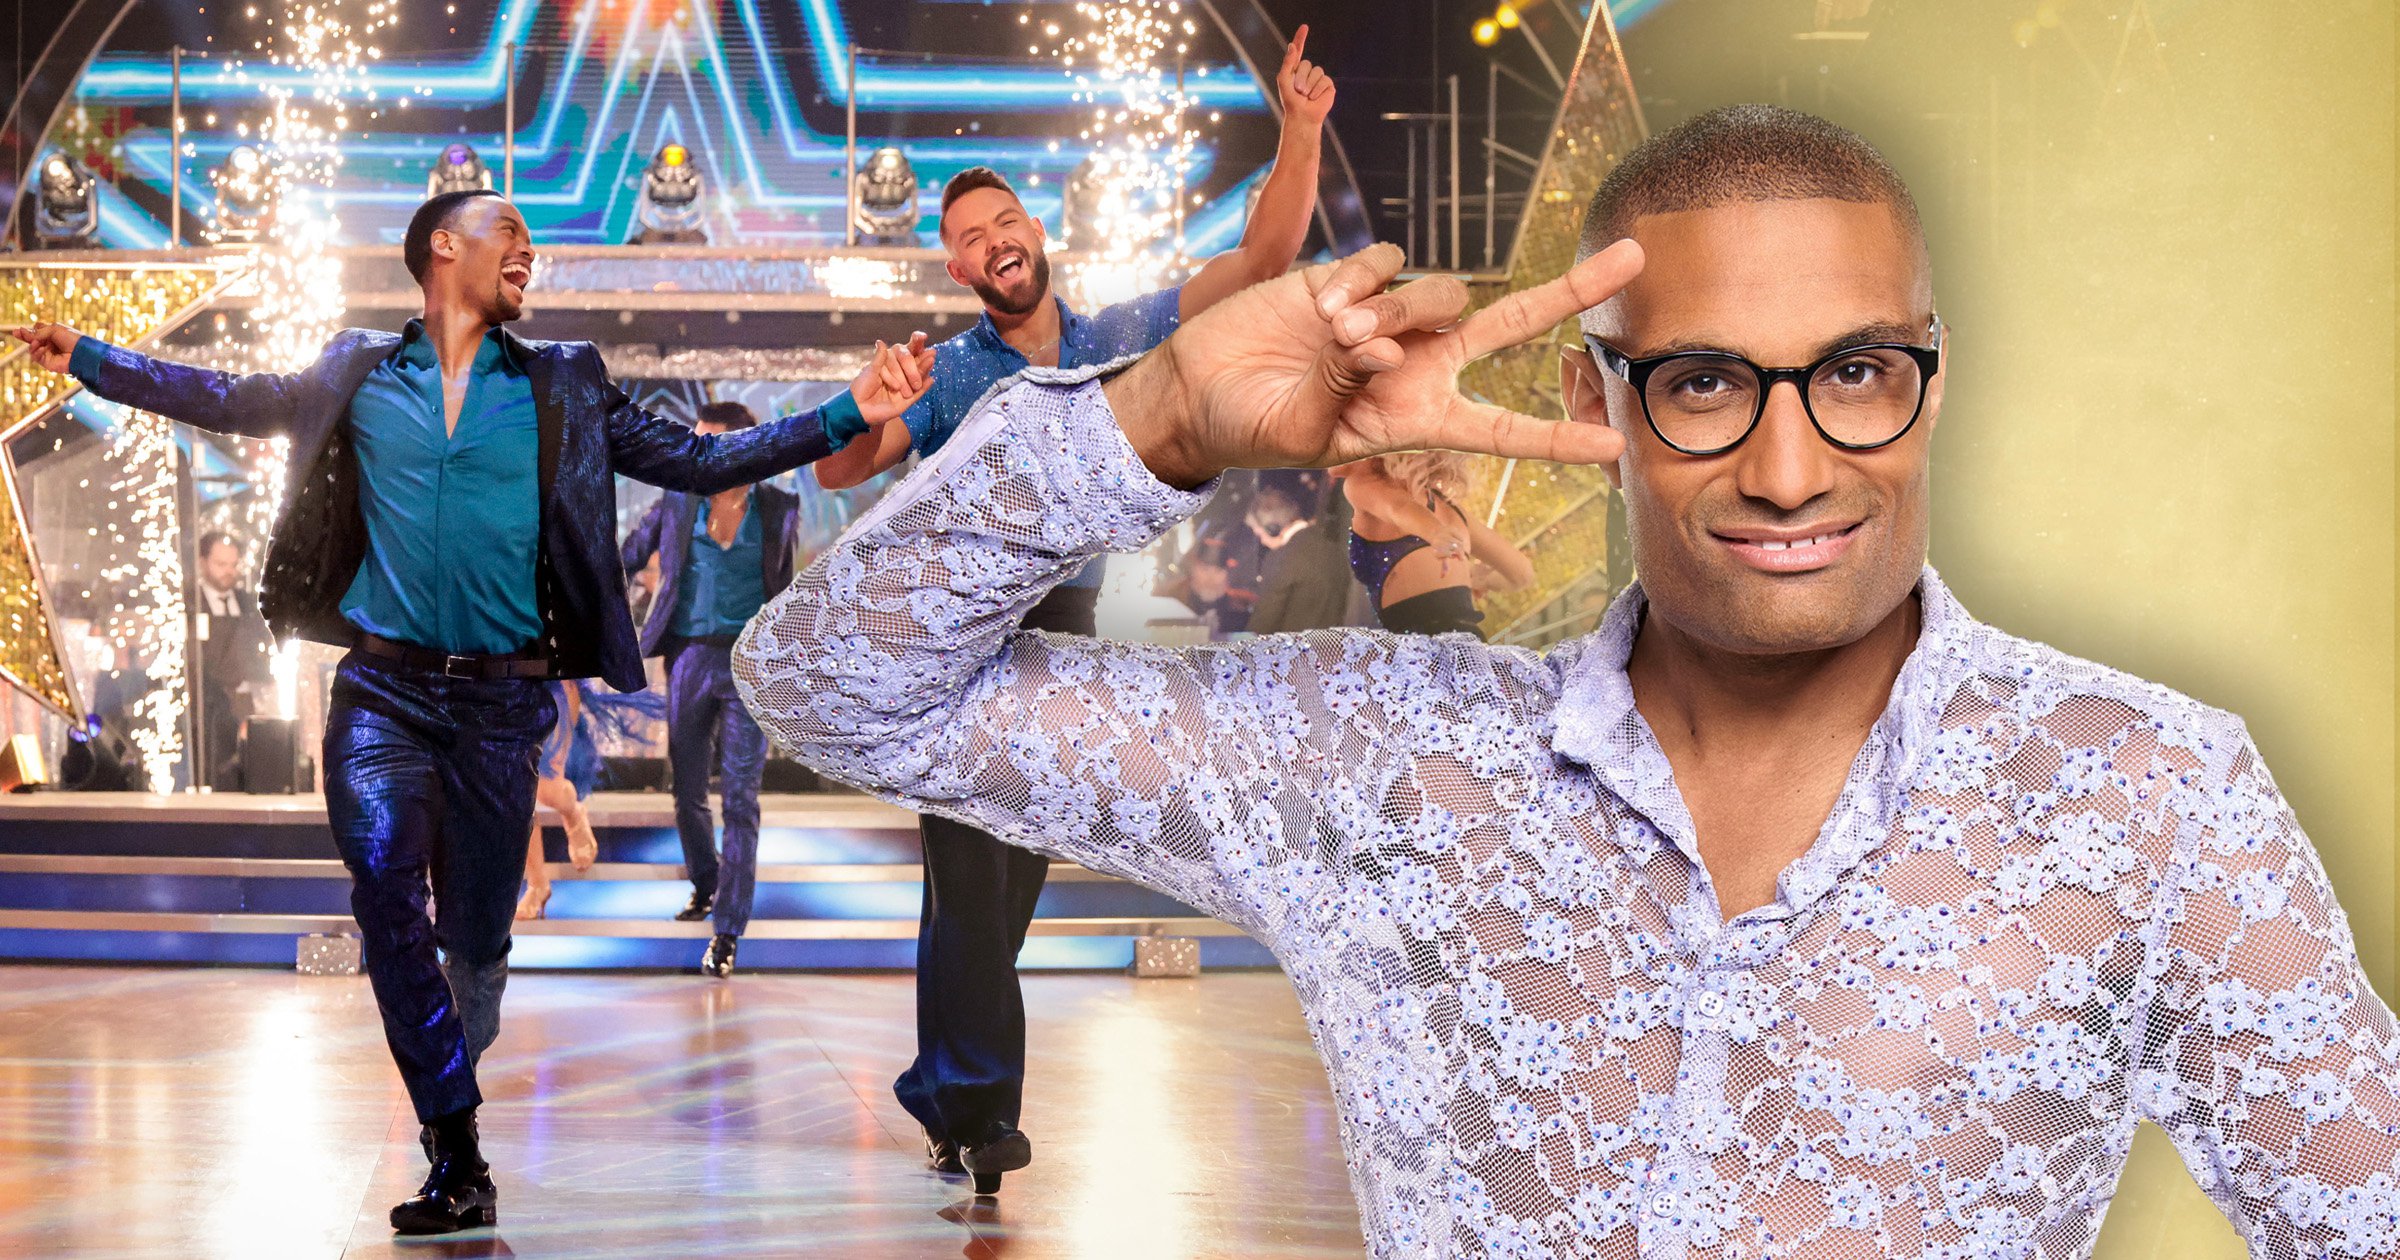 Strictly’s John Whaite and Johannes Radebe’s gave Richie Anderson confidence to perform with male dancer: ‘I just felt so much inspiration’